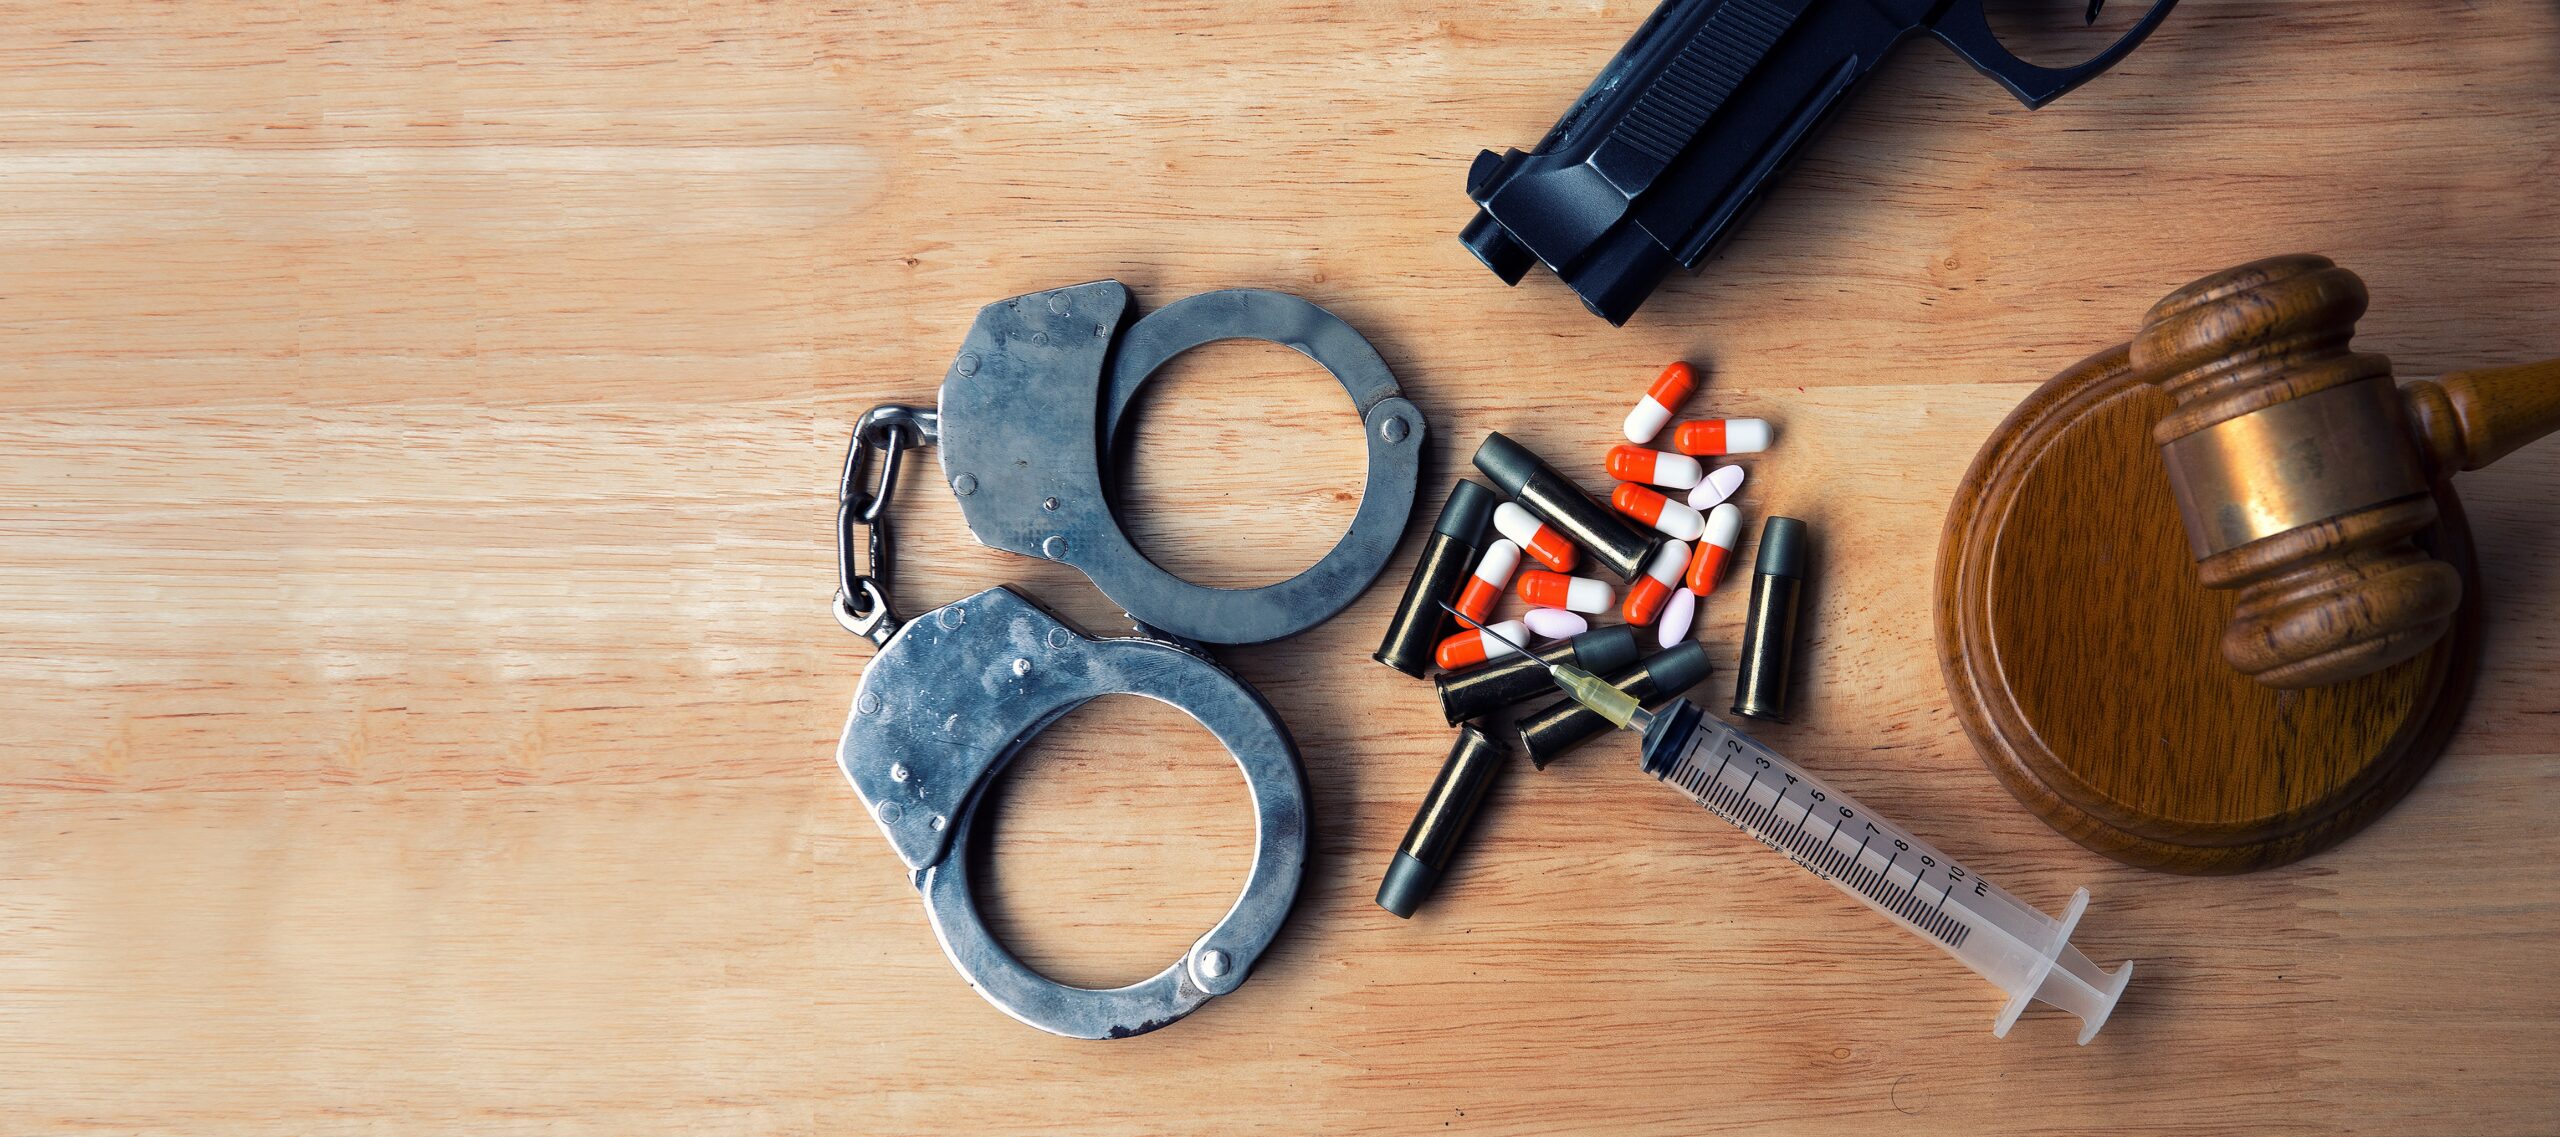 Drugs, a gun, bullets, handcuffs, and a justice gavel are scattered together on a wooden background. If you’ve been charged for a serious drug crime, contact our experienced Oklahoma drug lawyer.